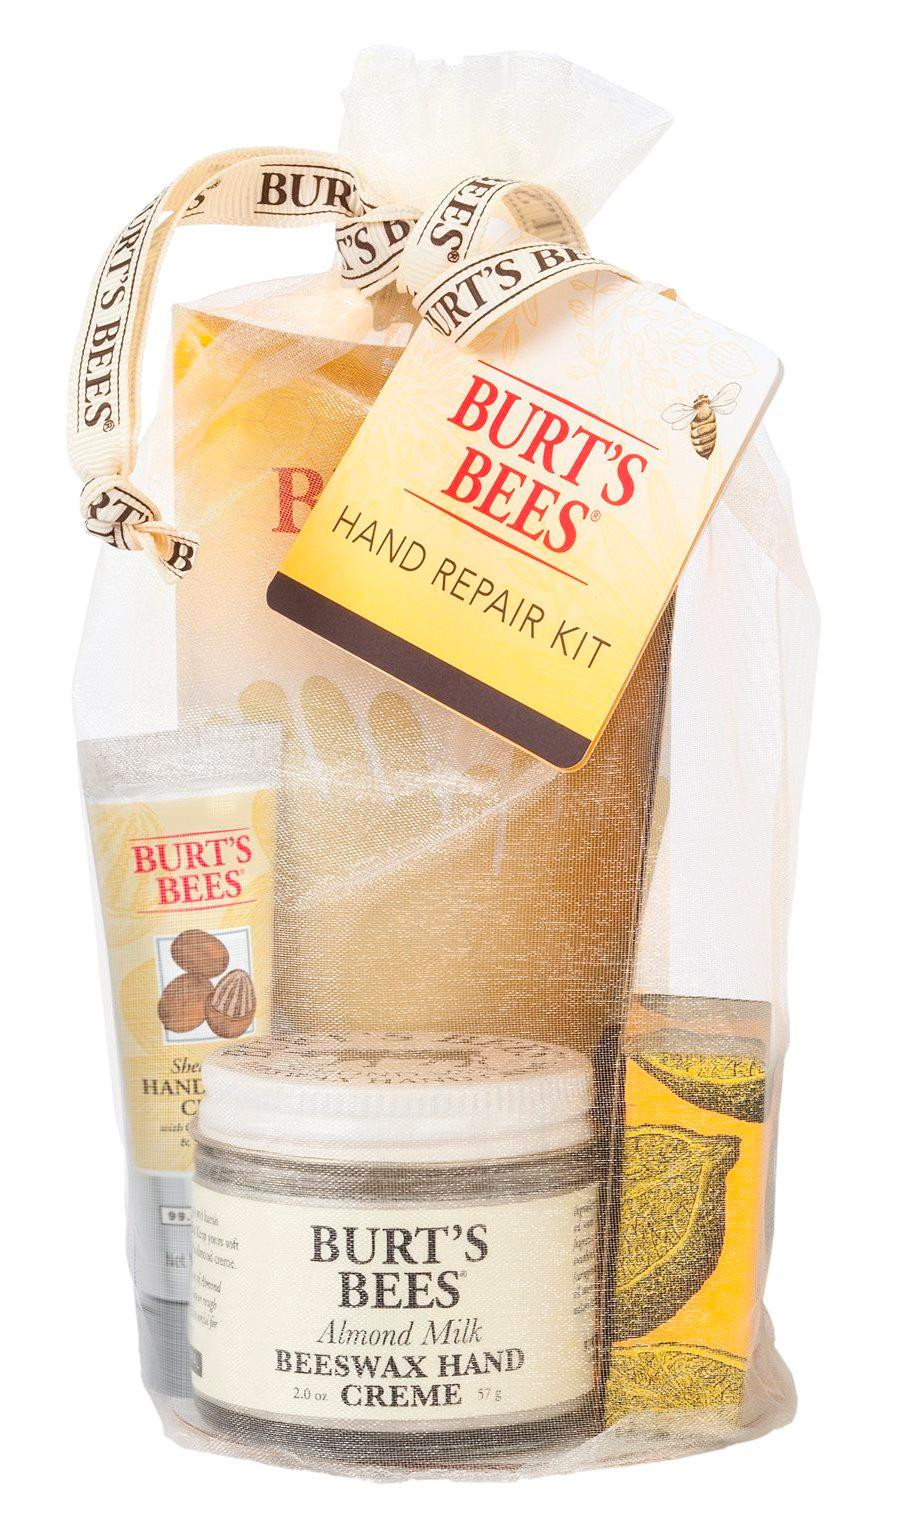 Burts Bees Baby Gift Sets
 Amazon Burt s Bees Essential Everyday Beauty Gift